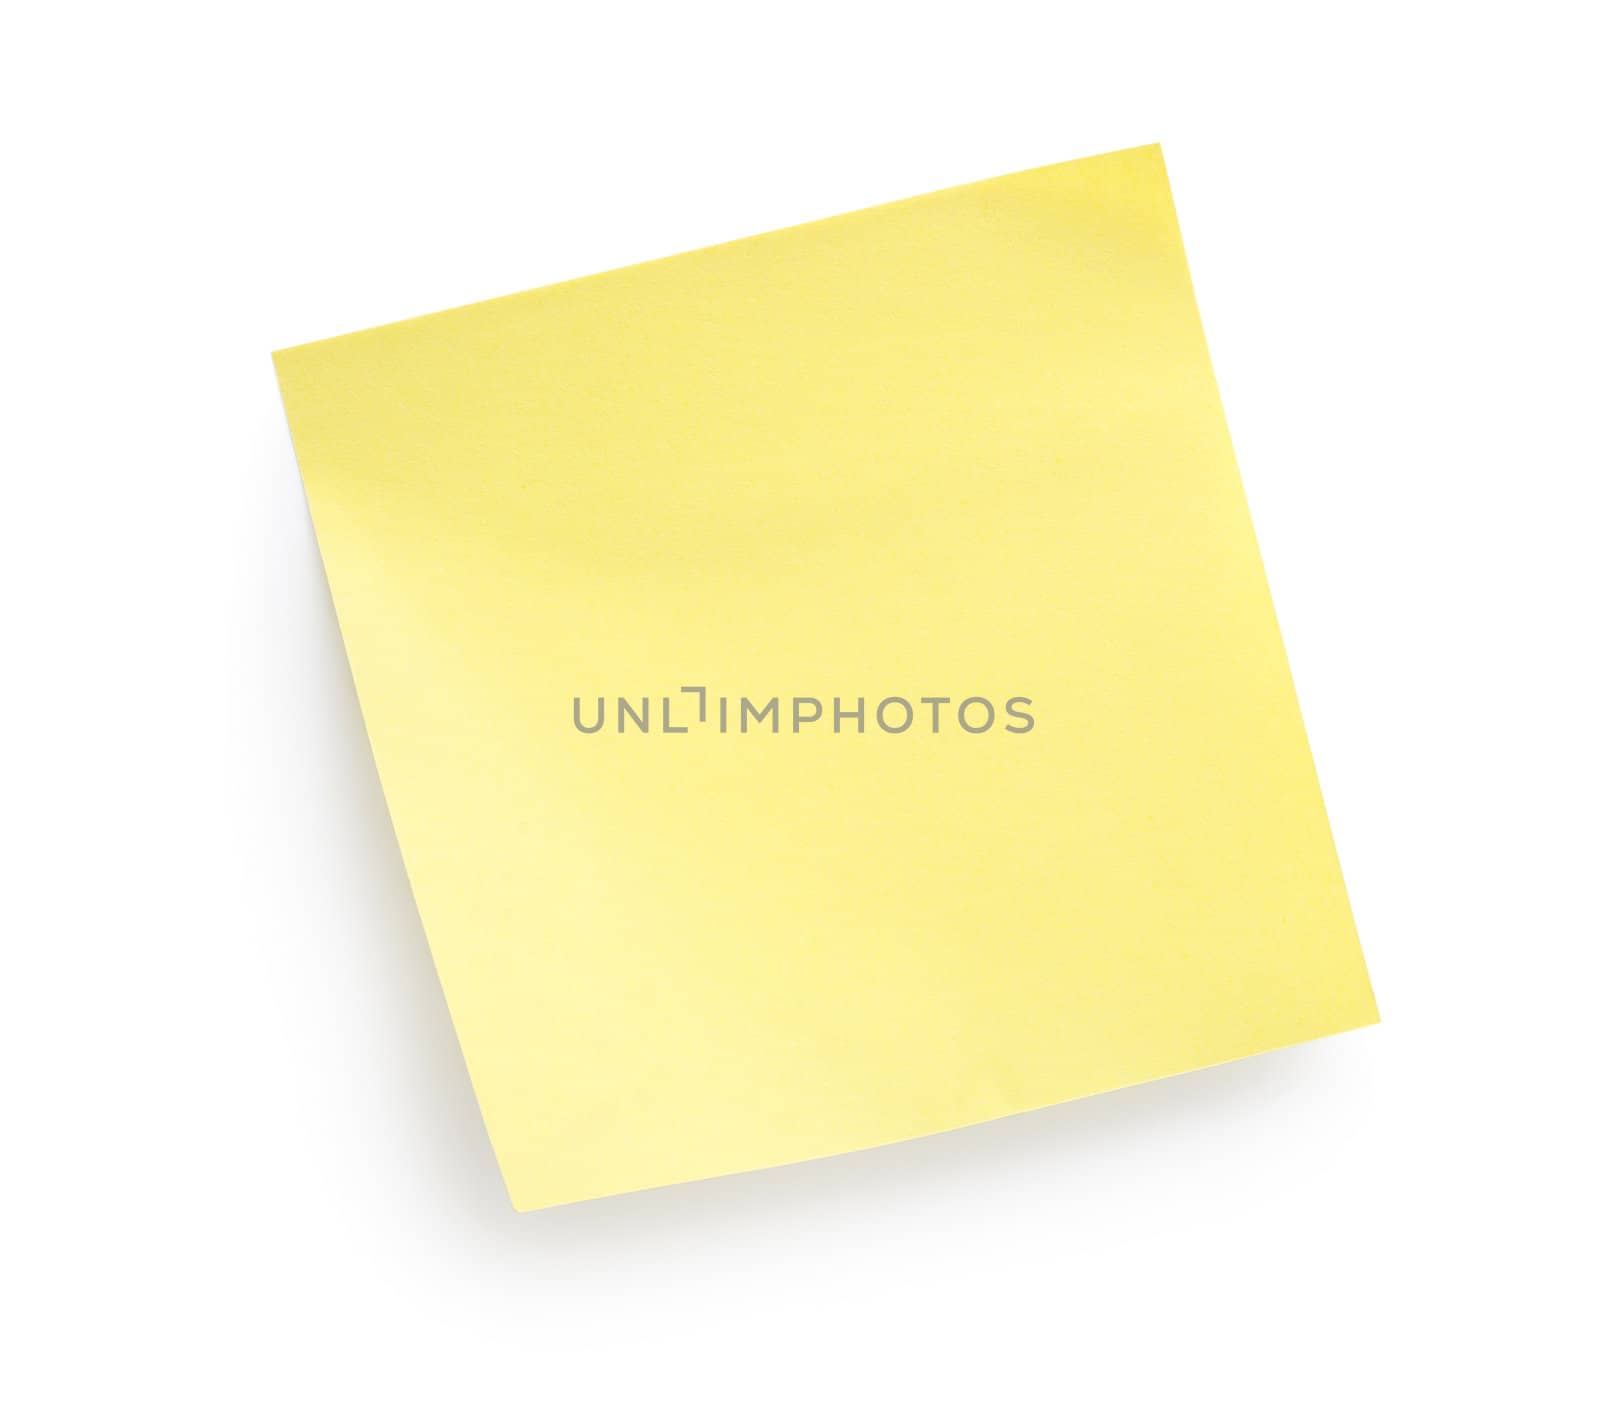 Yellow paper isolated on a white background